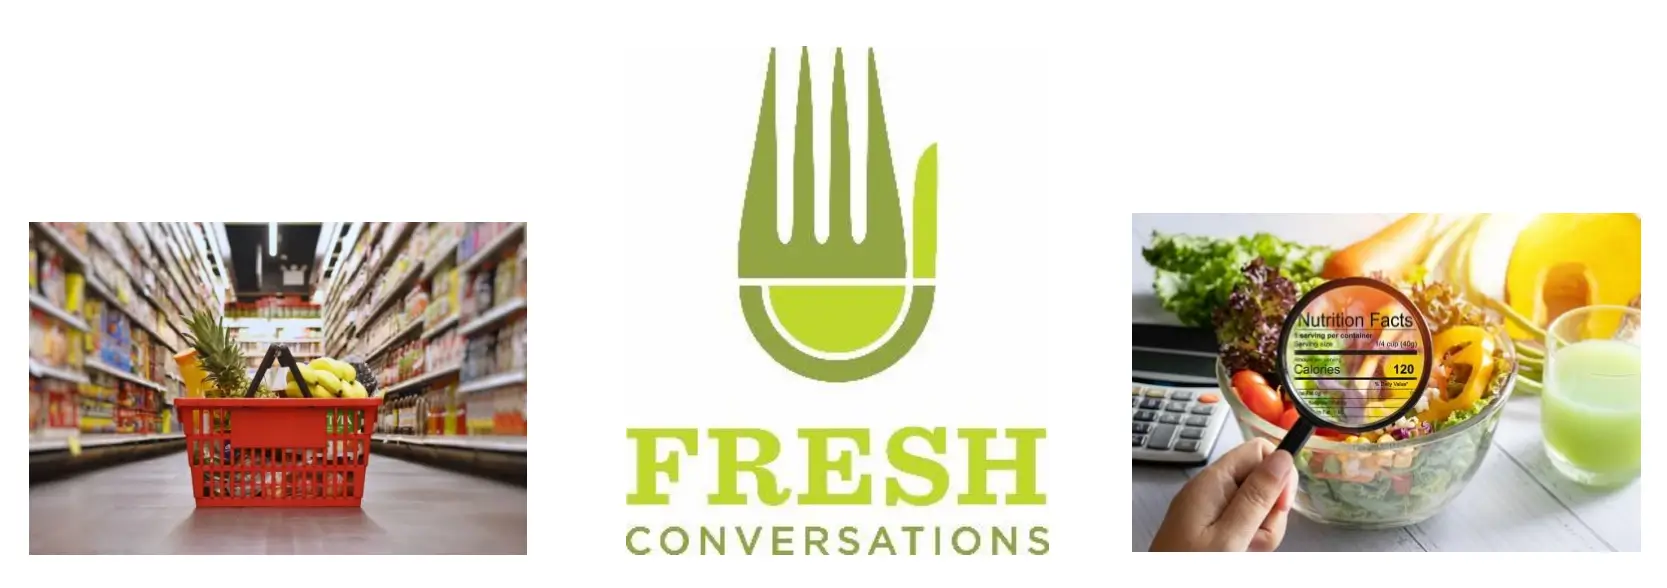 A green logo of fresh conversations with an image of a fork.